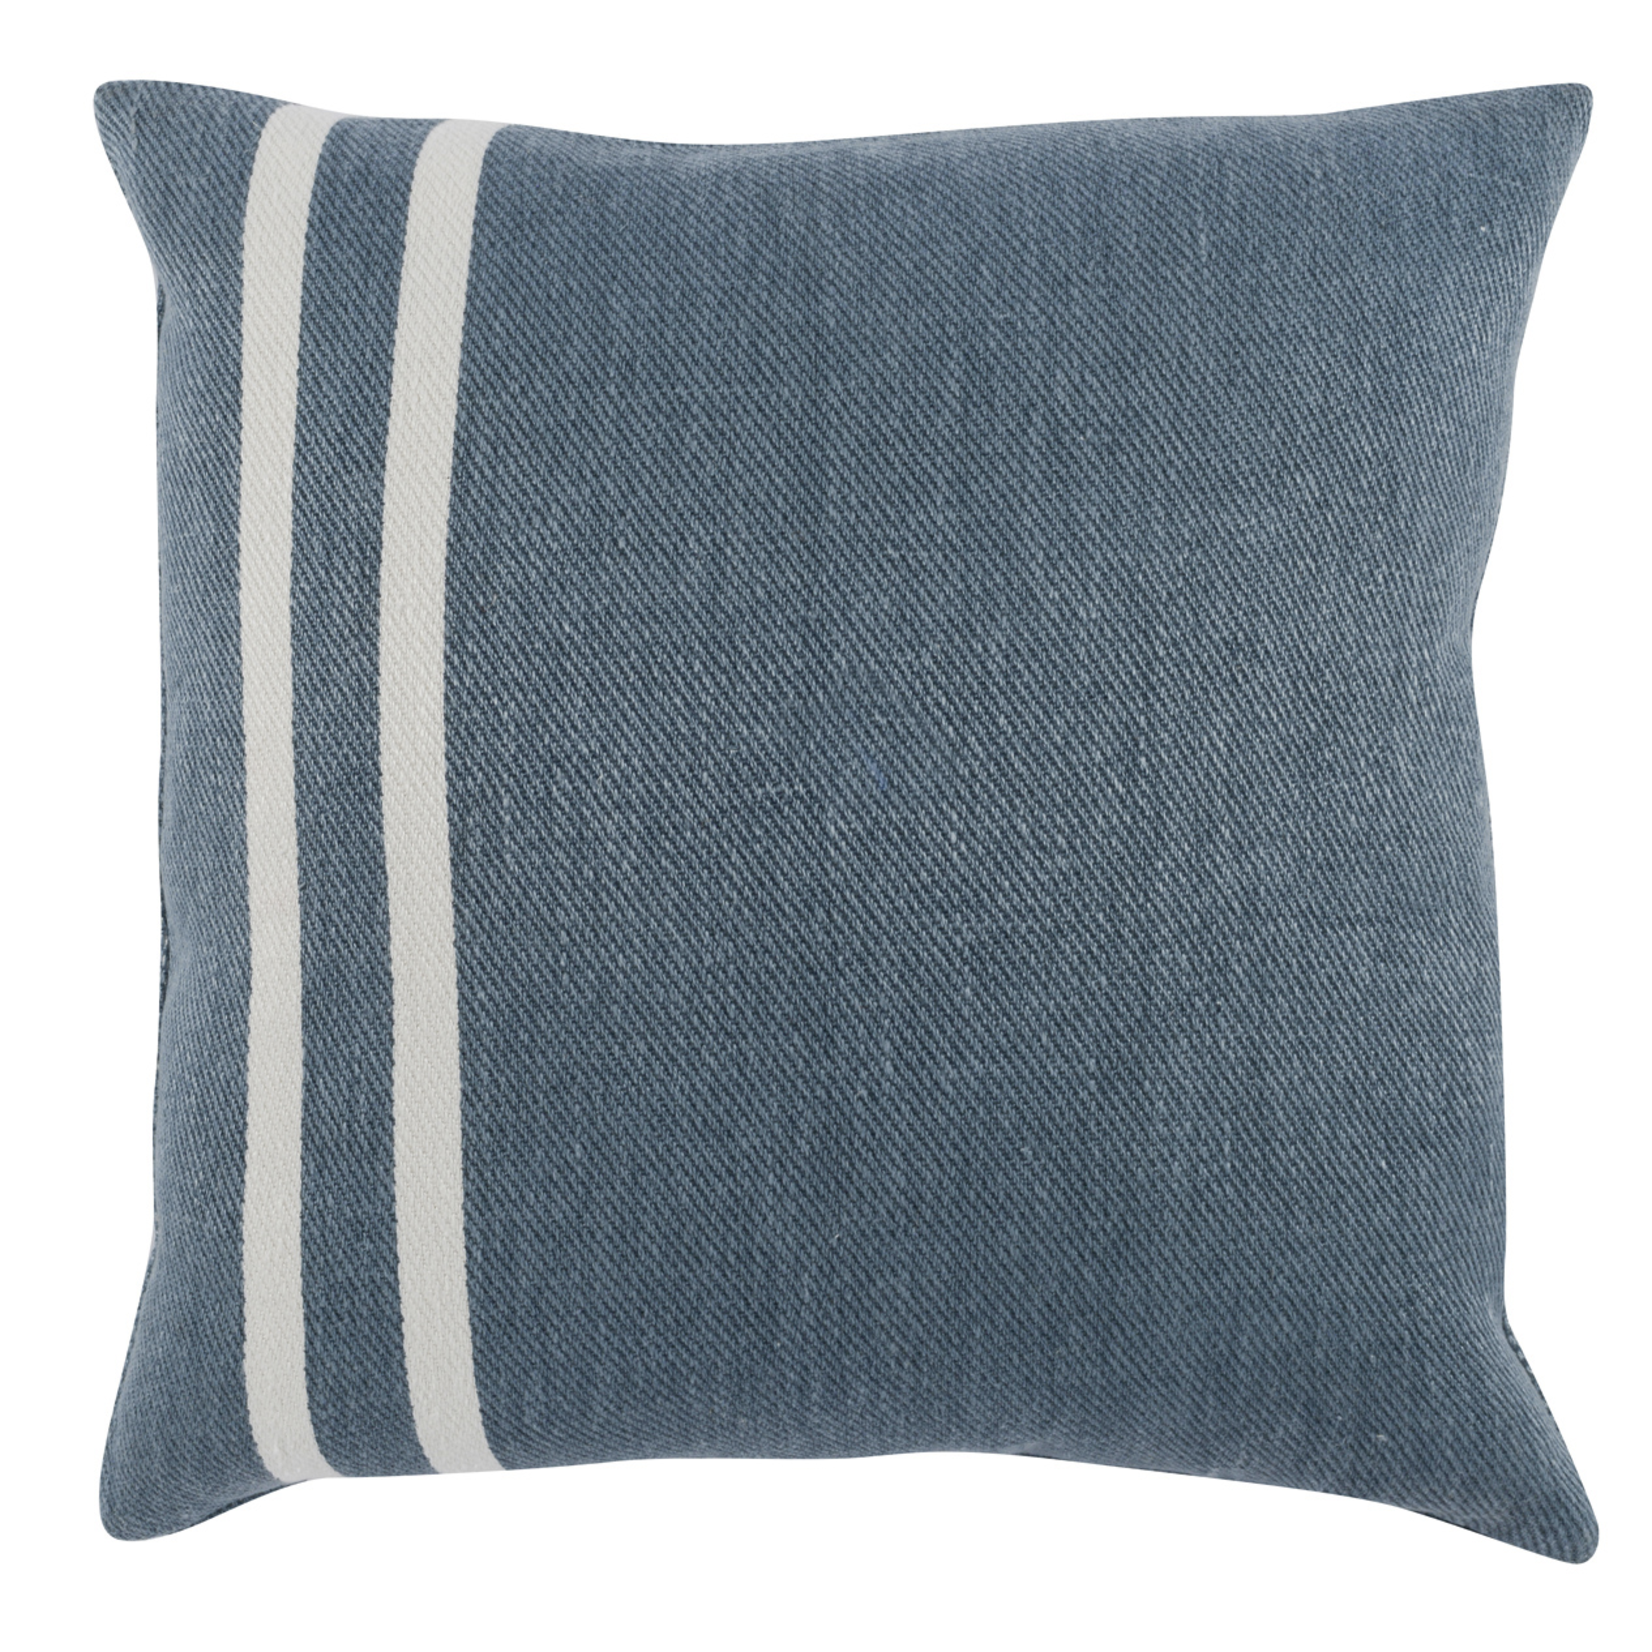 Outside The Box 20x20 CP Lakeshore Blue Hand-printed Linen Twill Blend Pillow